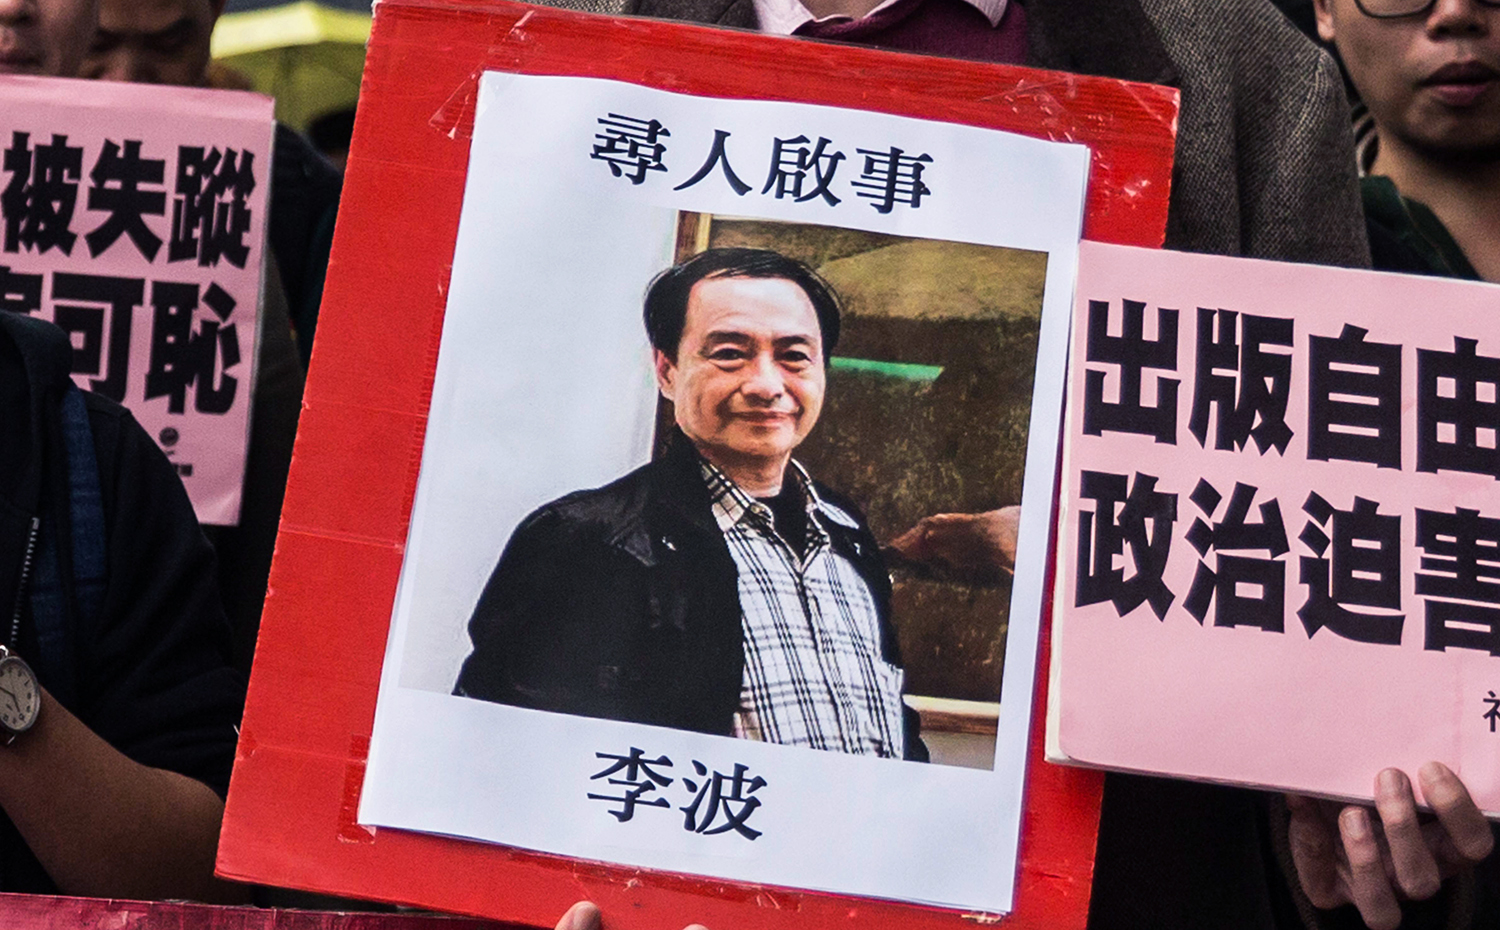 In this picture taken on January 3, 2016, a protestor holds up a missing person notice for Lee Bo, 65, the latest of five Hong Kong booksellers from the same Mighty Current publishing house to go missing, as they walk towards China's Liaison Office in Hong Kong. Britain confirmed on January 5 that one of five missing Hong Kong booksellers feared detained by Chinese authorities is a UK citizen, saying it was "deeply concerned" over the disappearances. AFP PHOTO / ANTHONY WALLACE